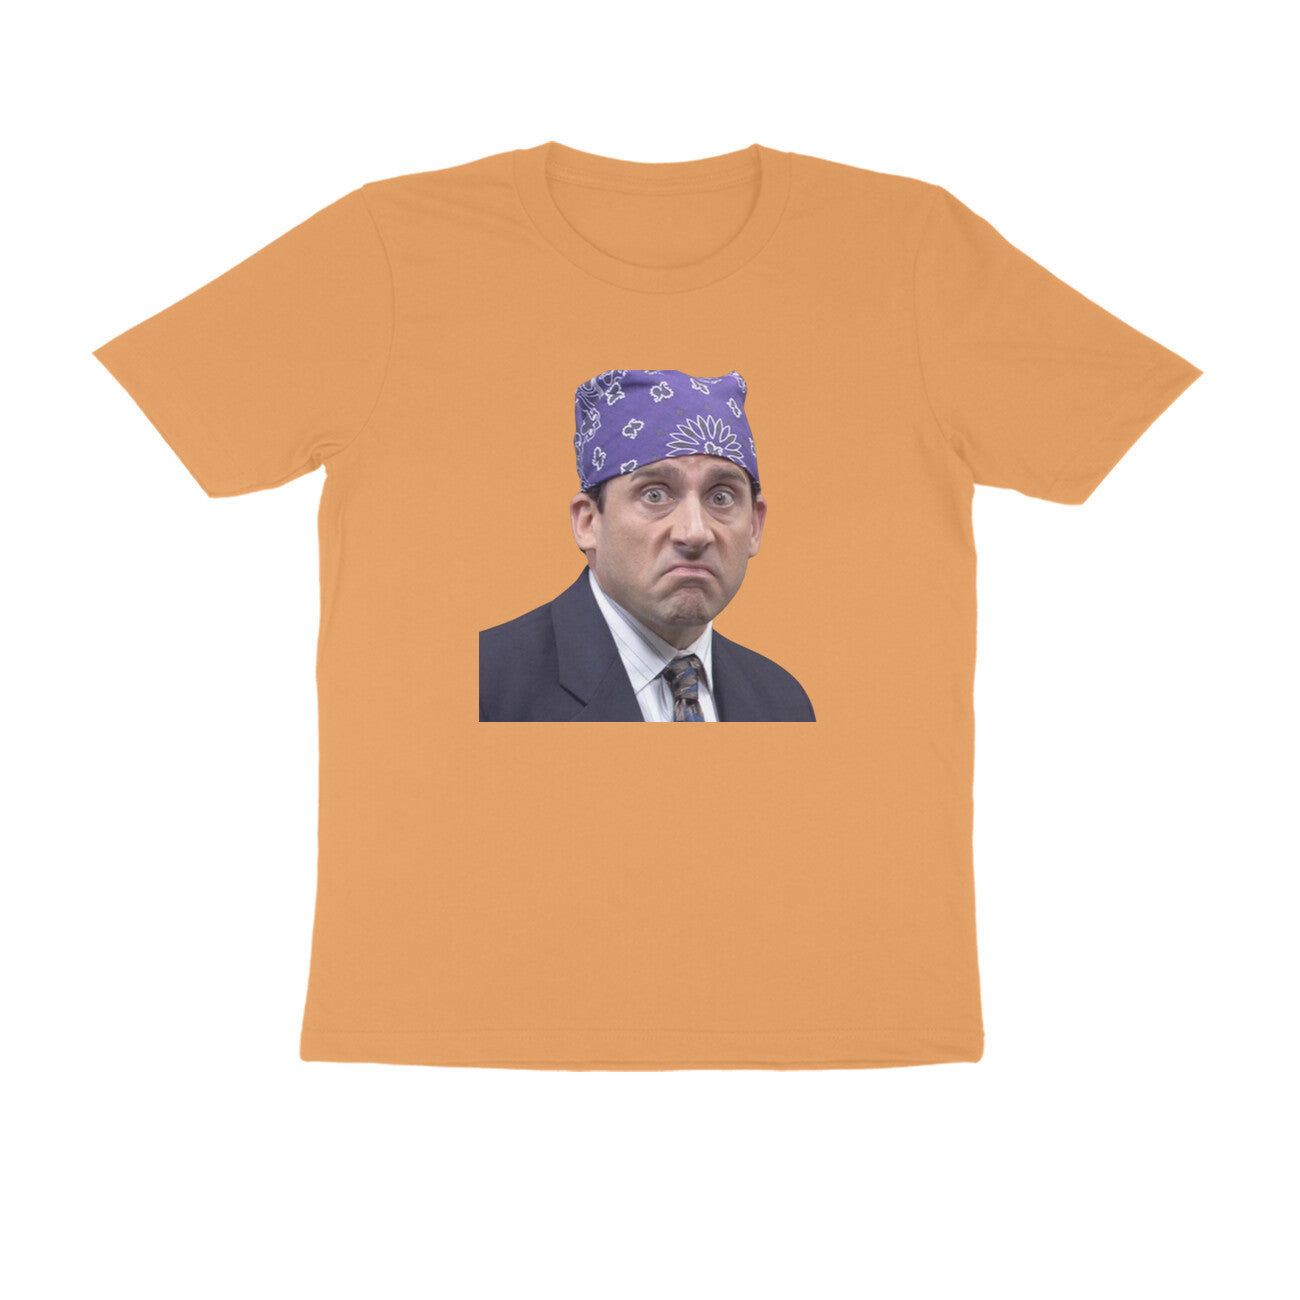 Prison Mike "The Office" Men's Round Neck T-Shirt